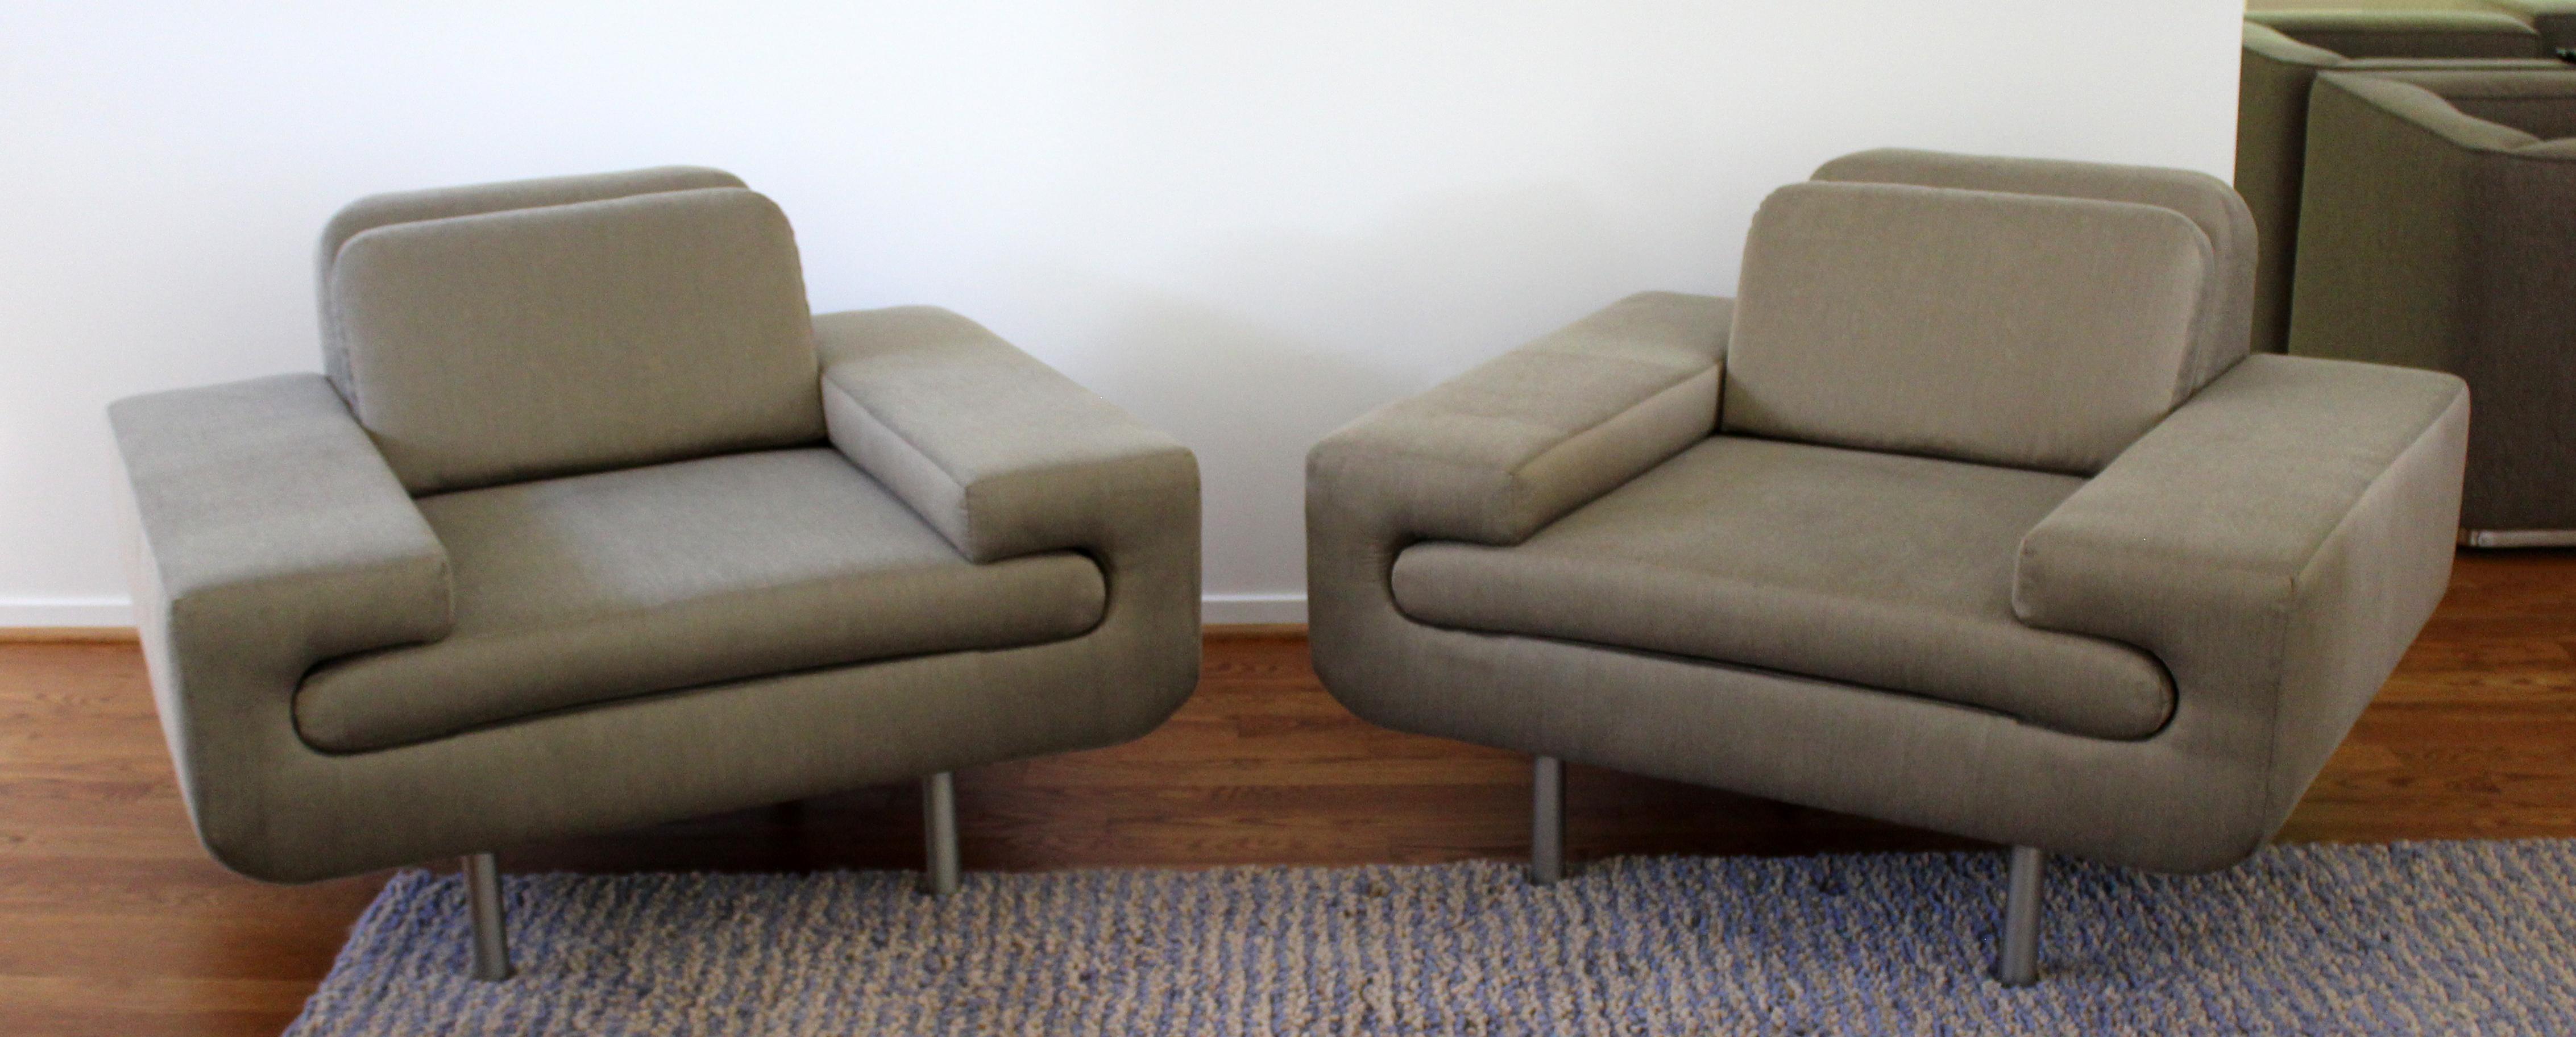 American Contemporary Modernist Pair of Sculptural Lounge Chairs by Weiman Preview